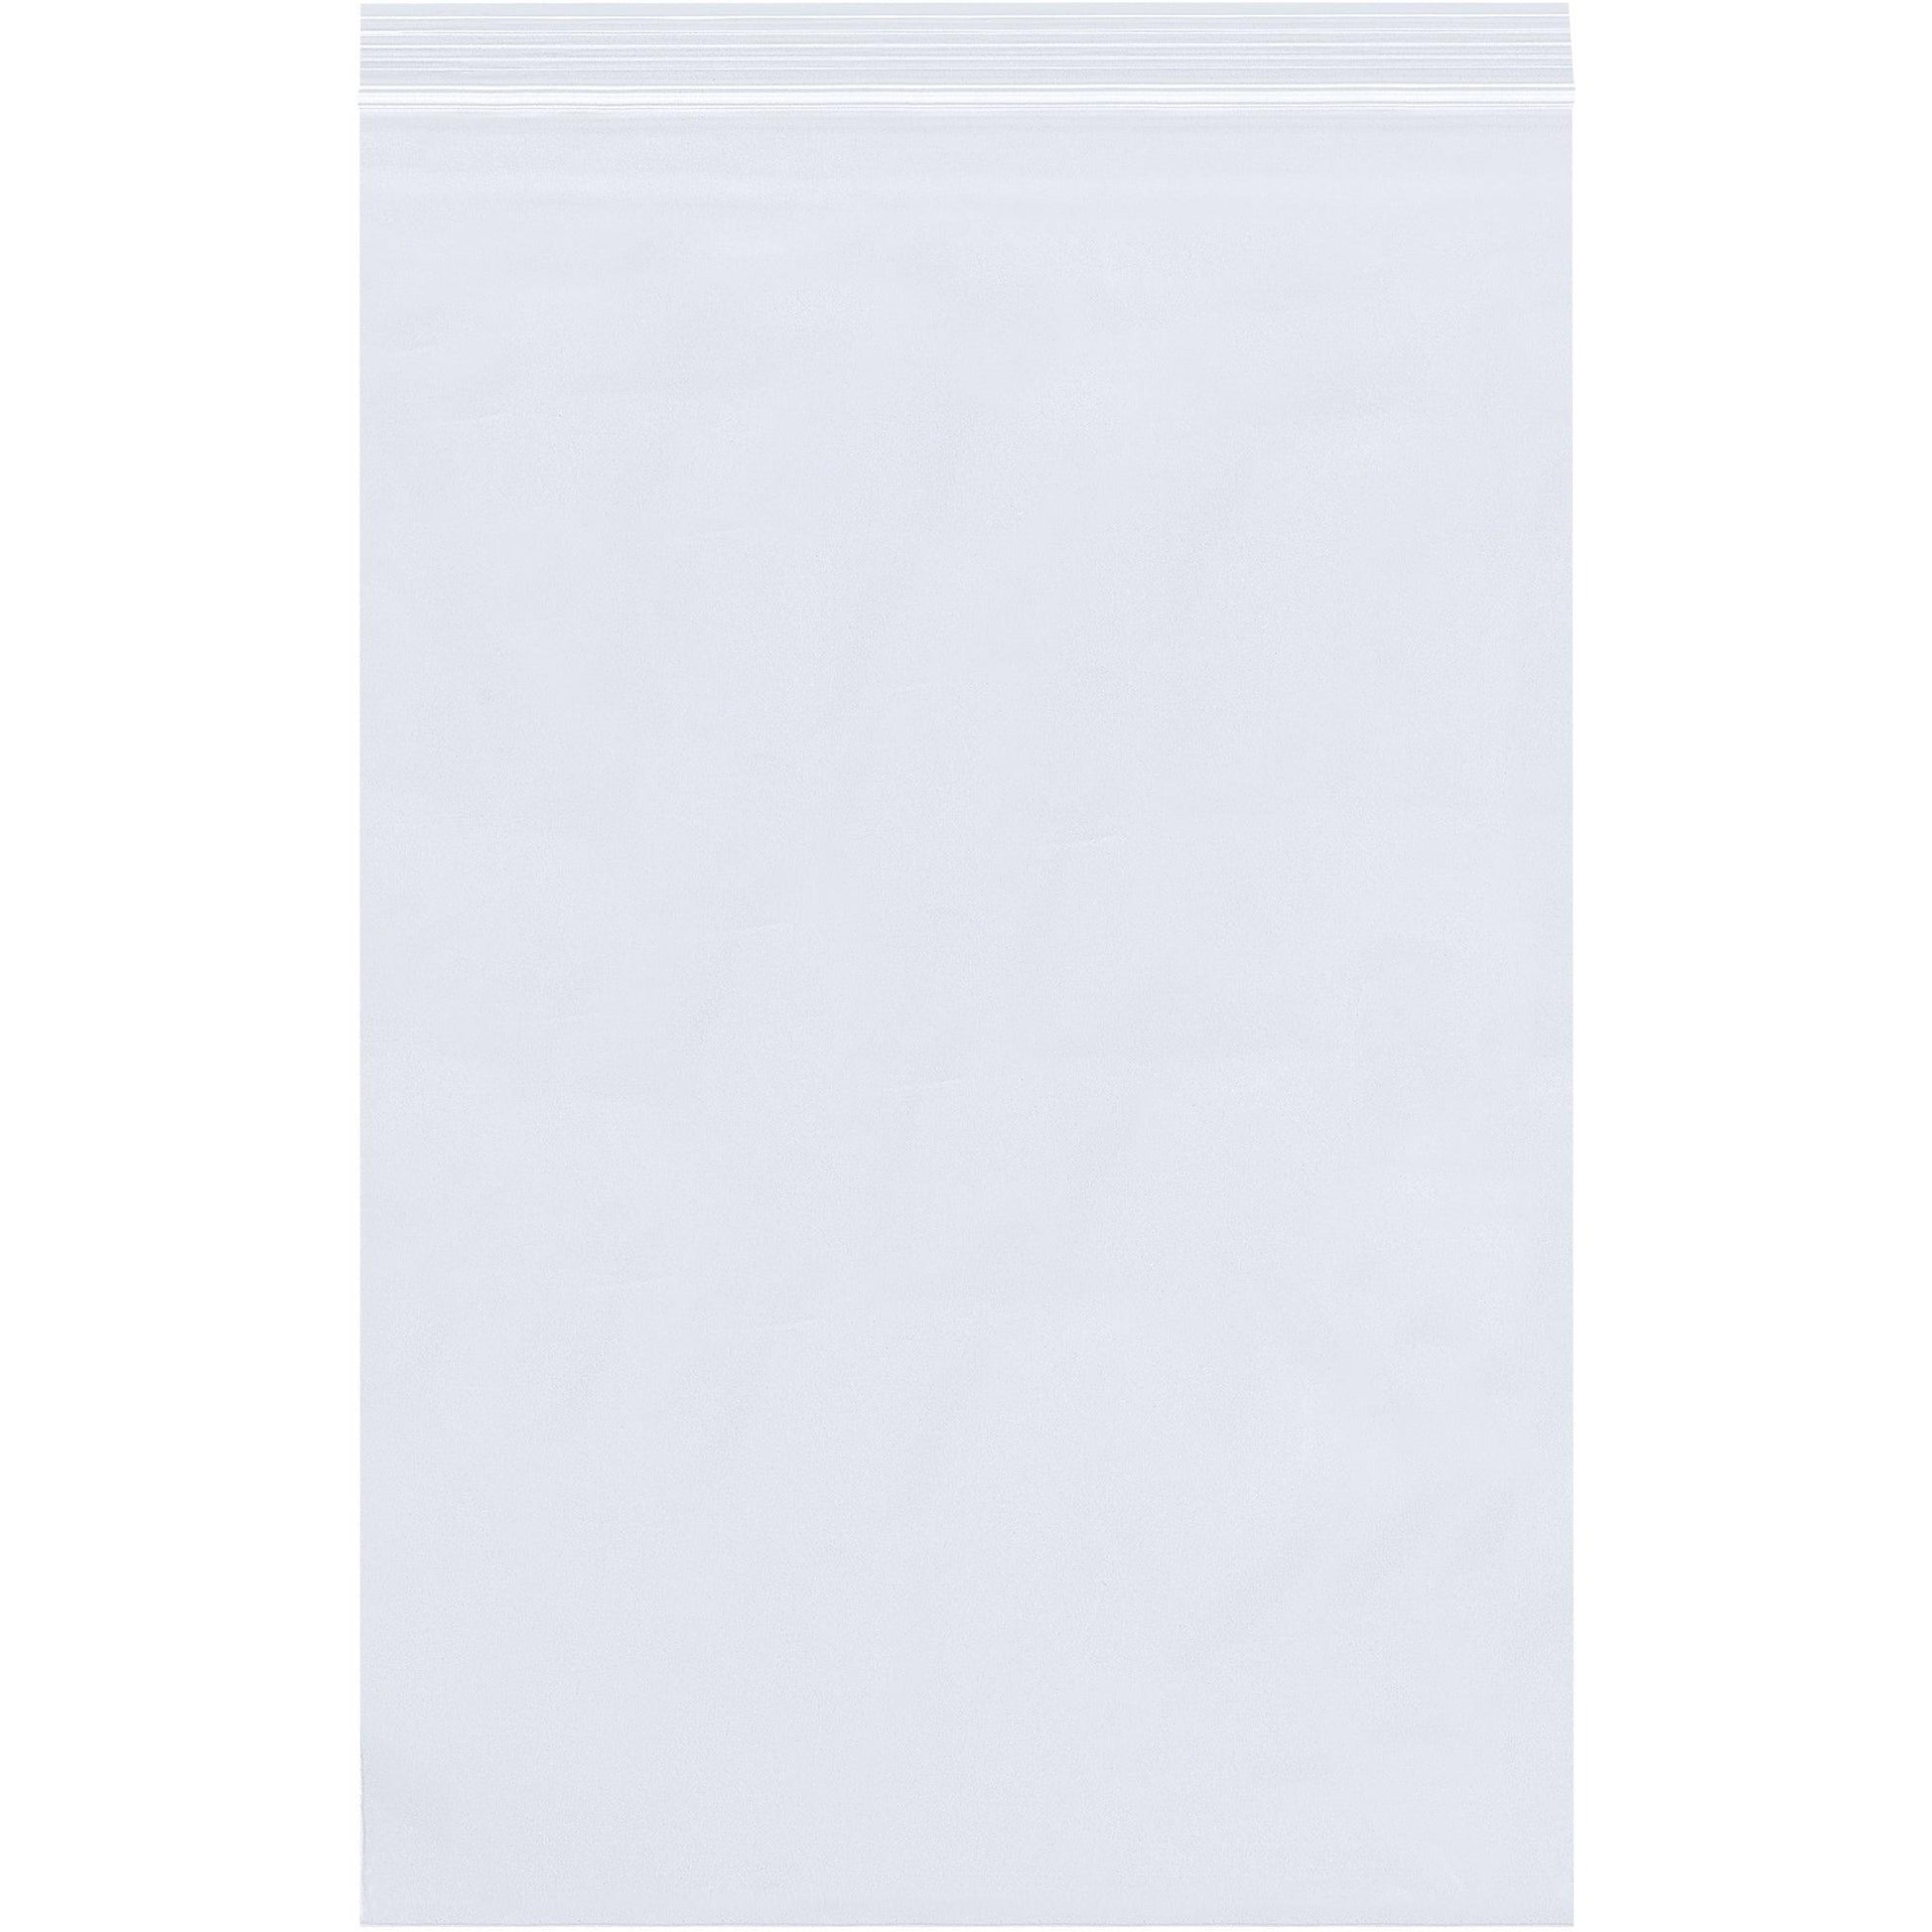 7 x 12" - 4 Mil Reclosable Poly Bags - PB3753